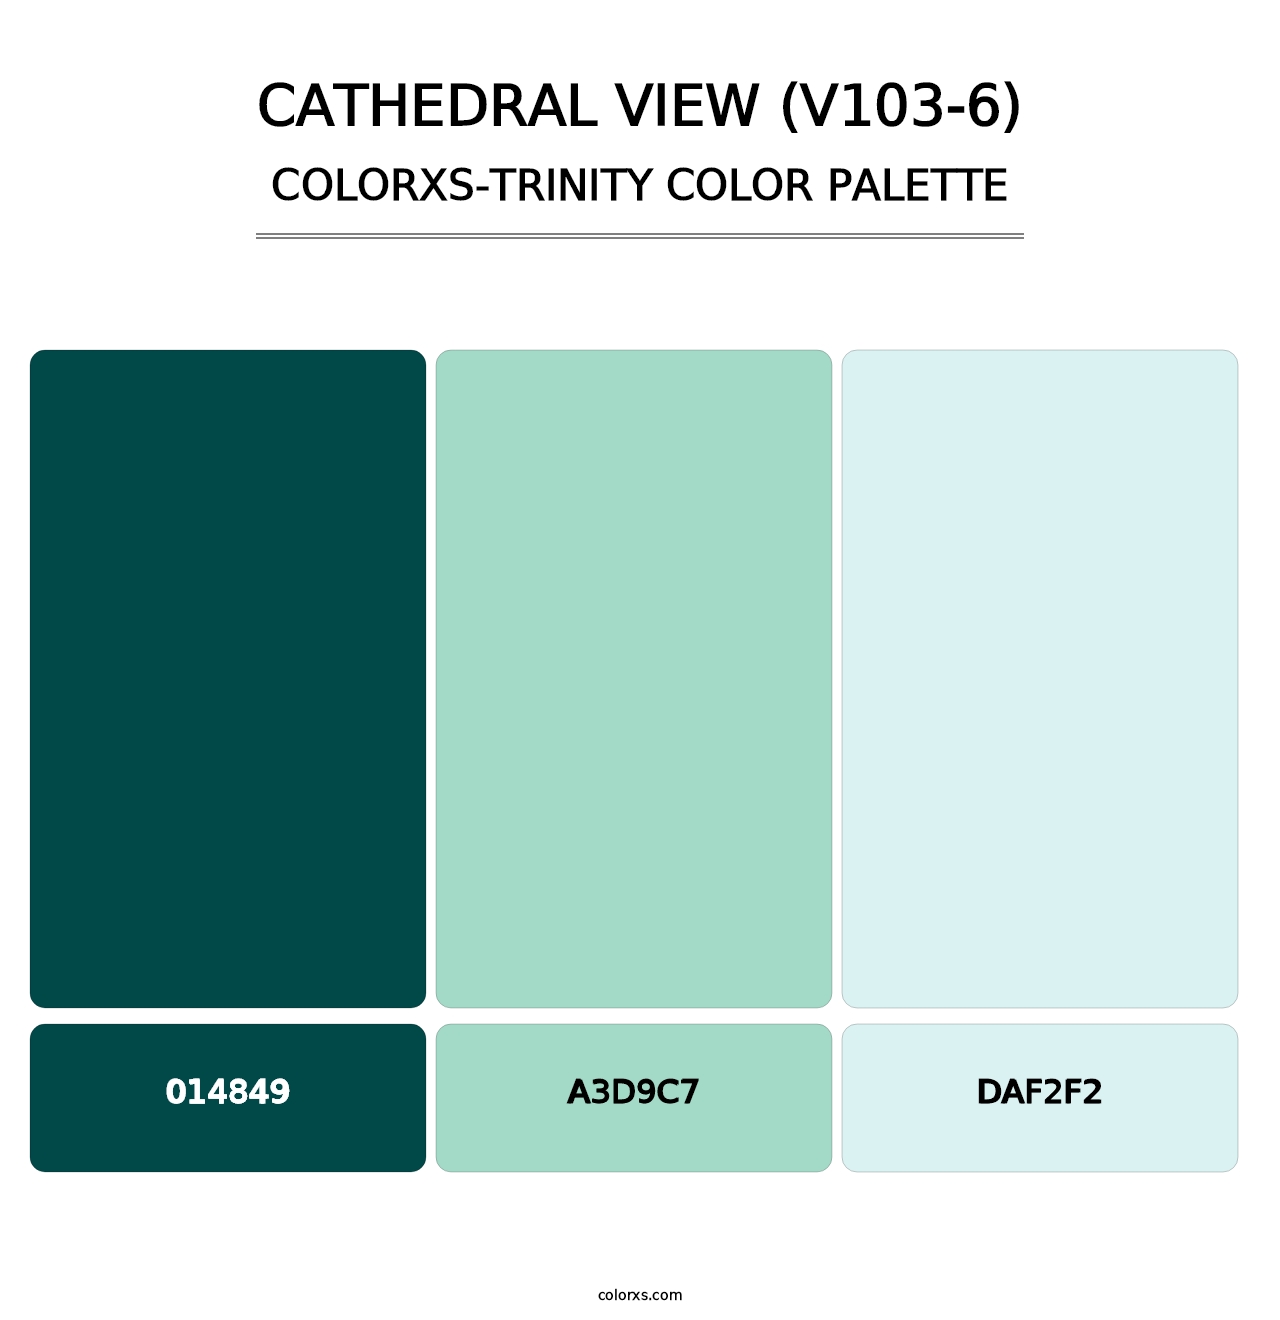 Cathedral View (V103-6) - Colorxs Trinity Palette